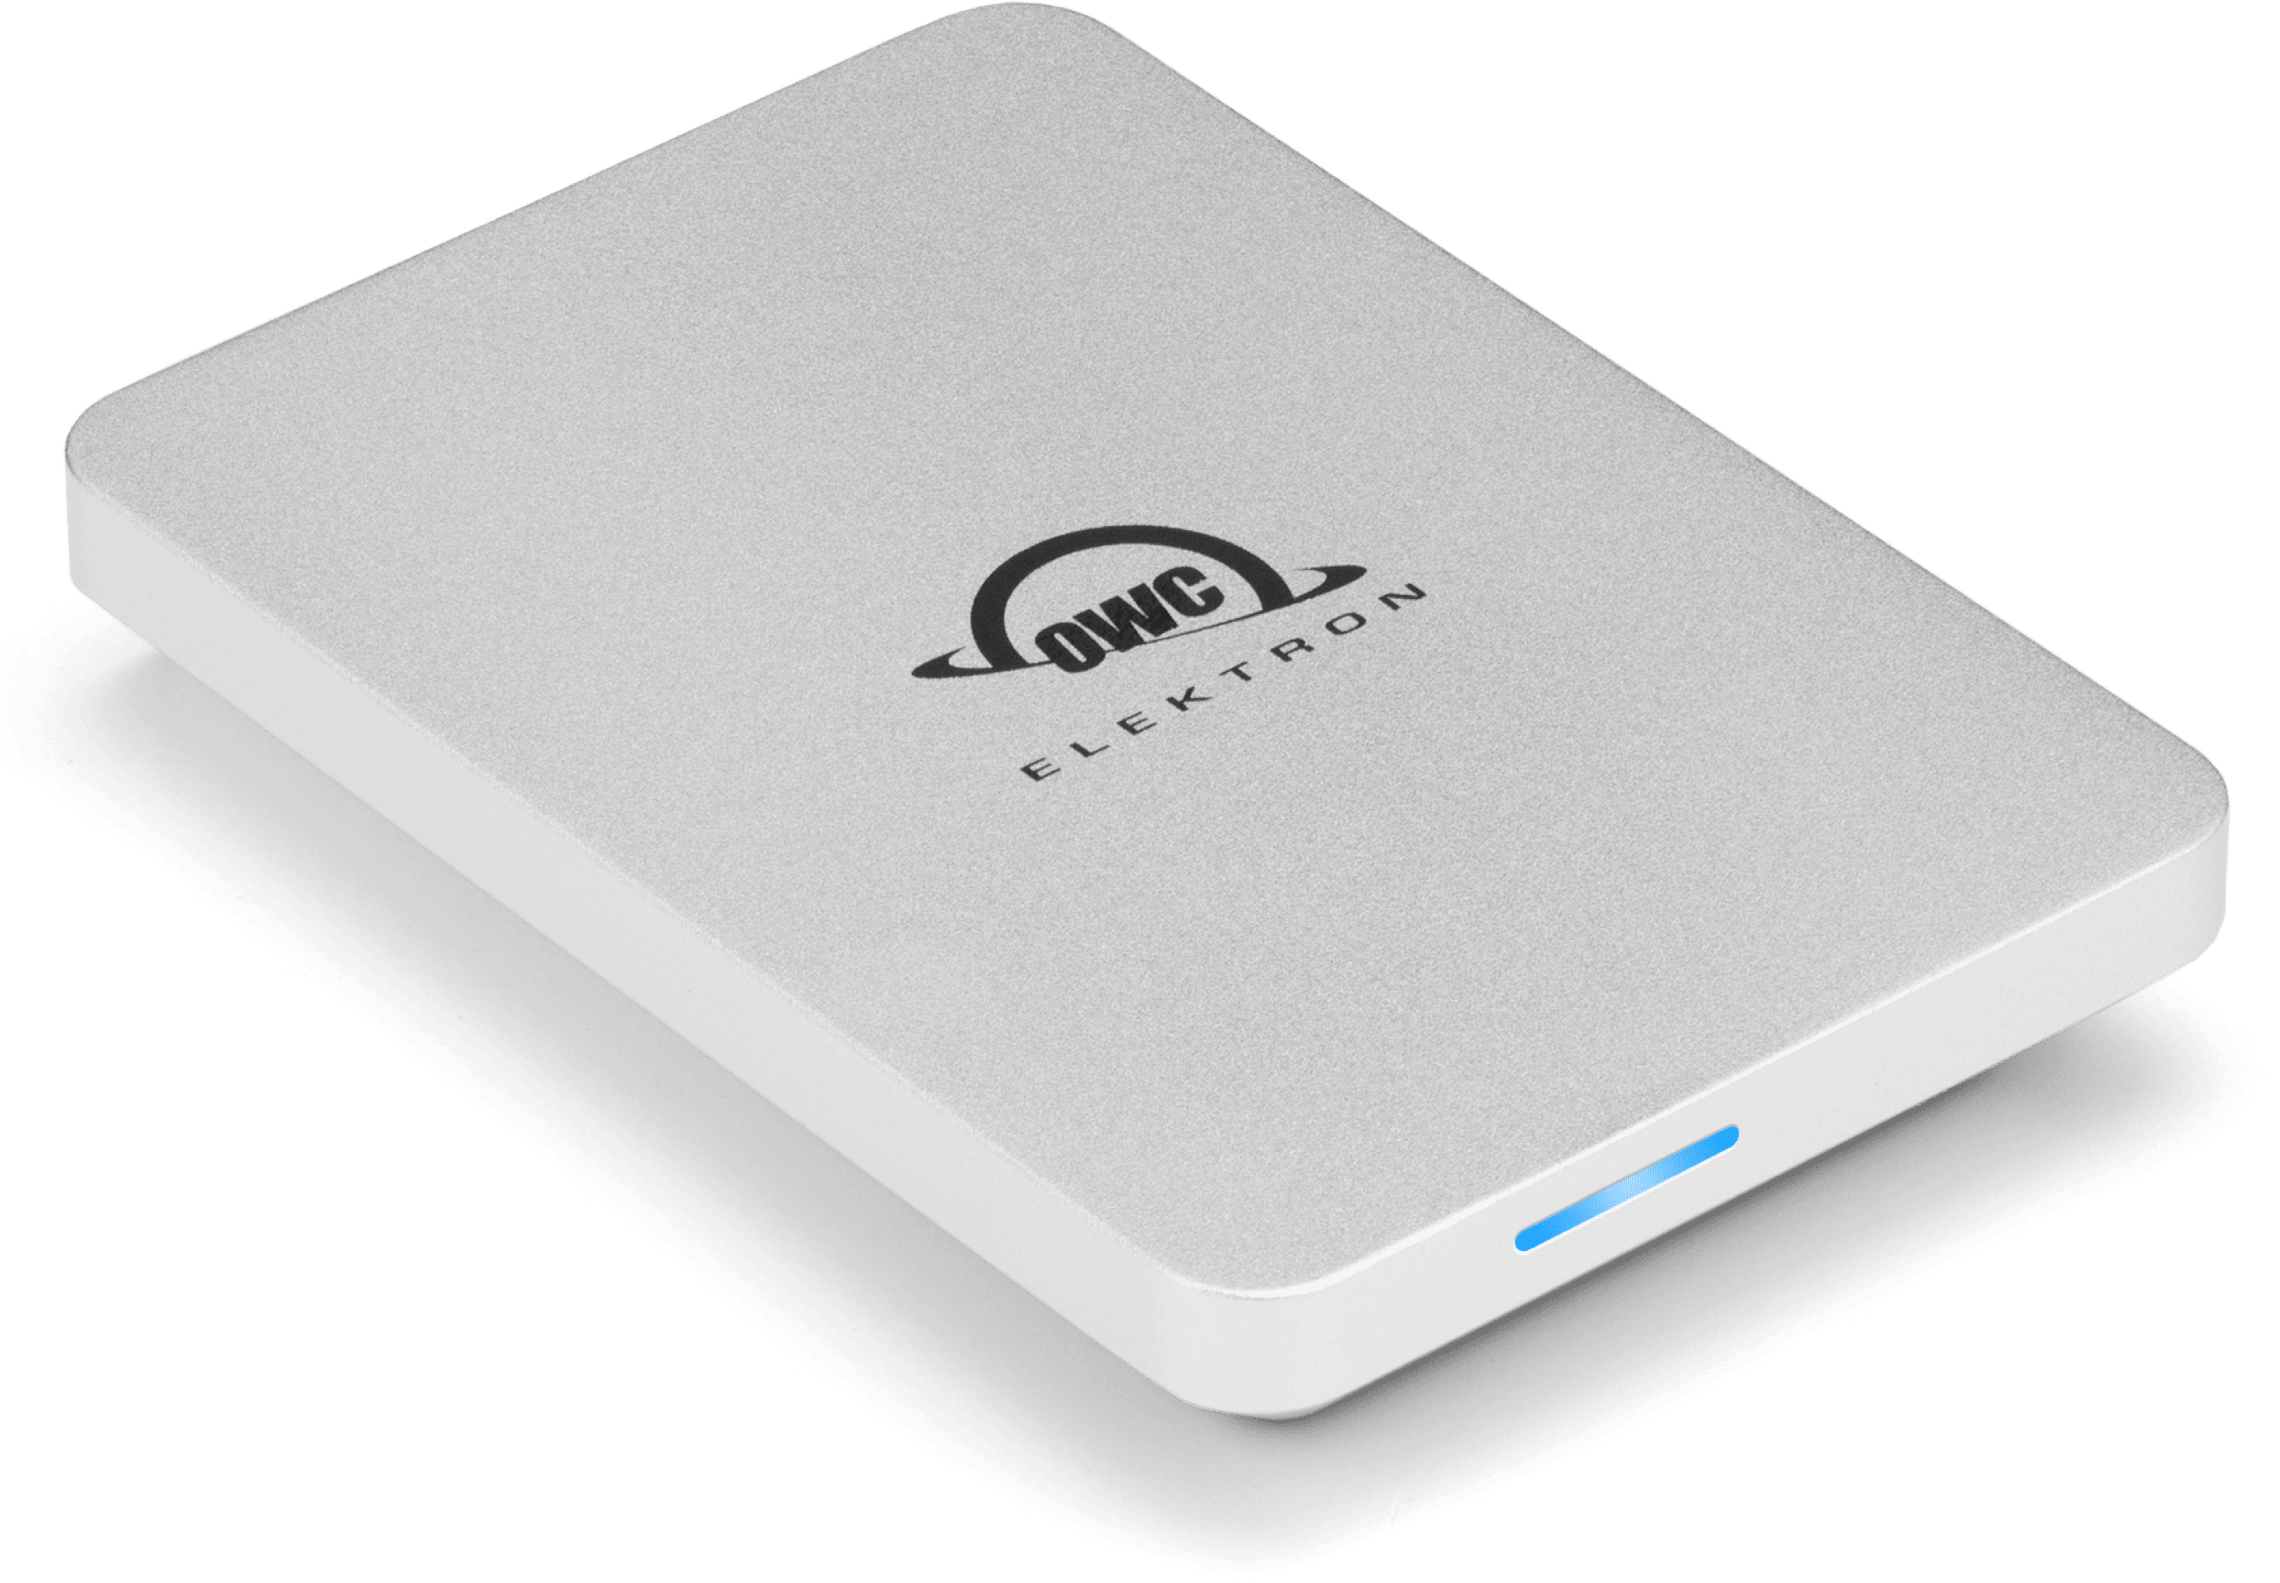 Inland Premium 1TB SSD Review: Standard Fare with a Great Warranty